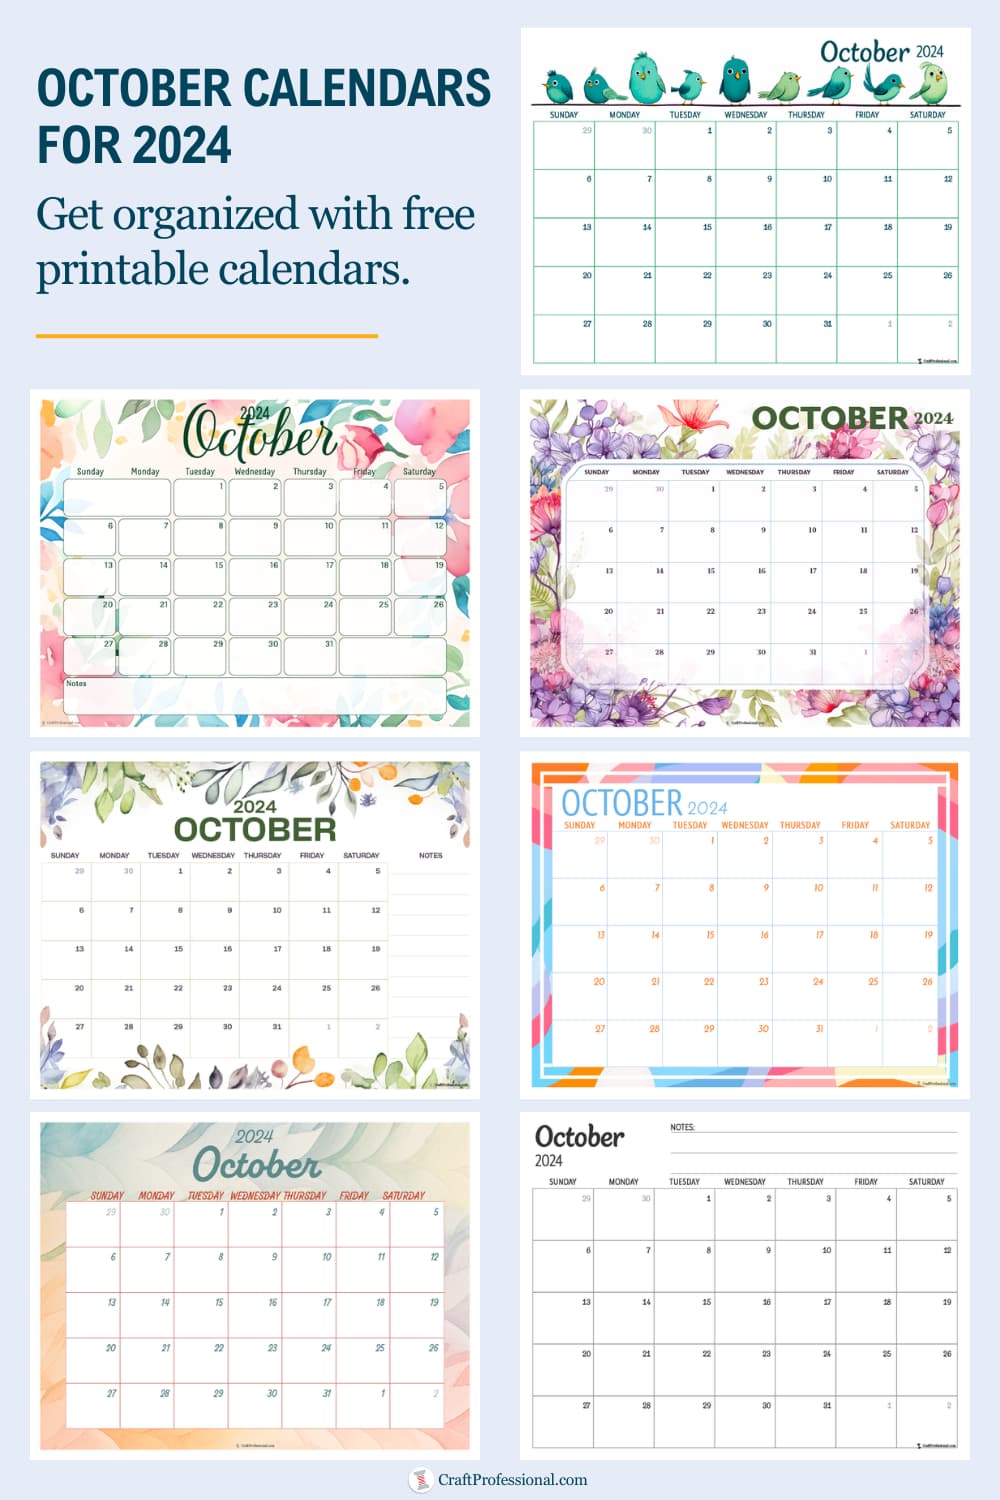 Collage of printable calendars. Text - October calendars for 2024. Get organized with free printable calendars.